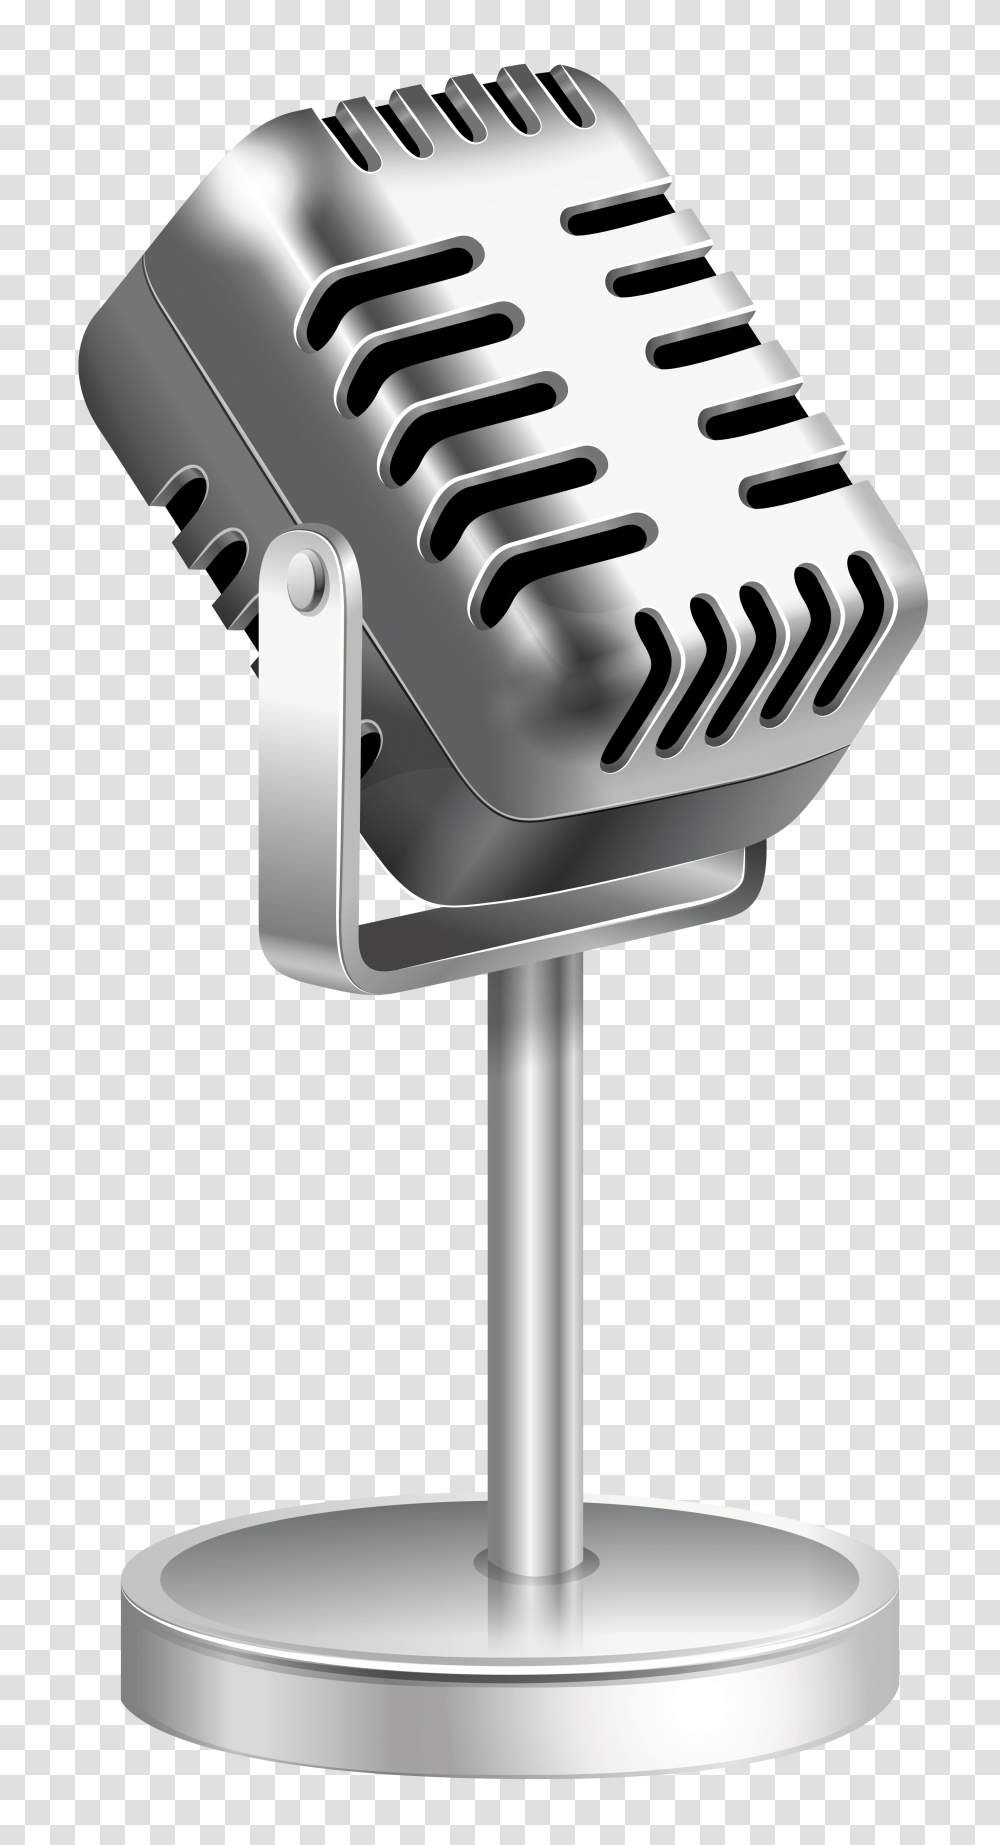 Download Retro Microphone Image Retro Microphone, Electrical Device, Sink Faucet, Mailbox, Letterbox Transparent Png